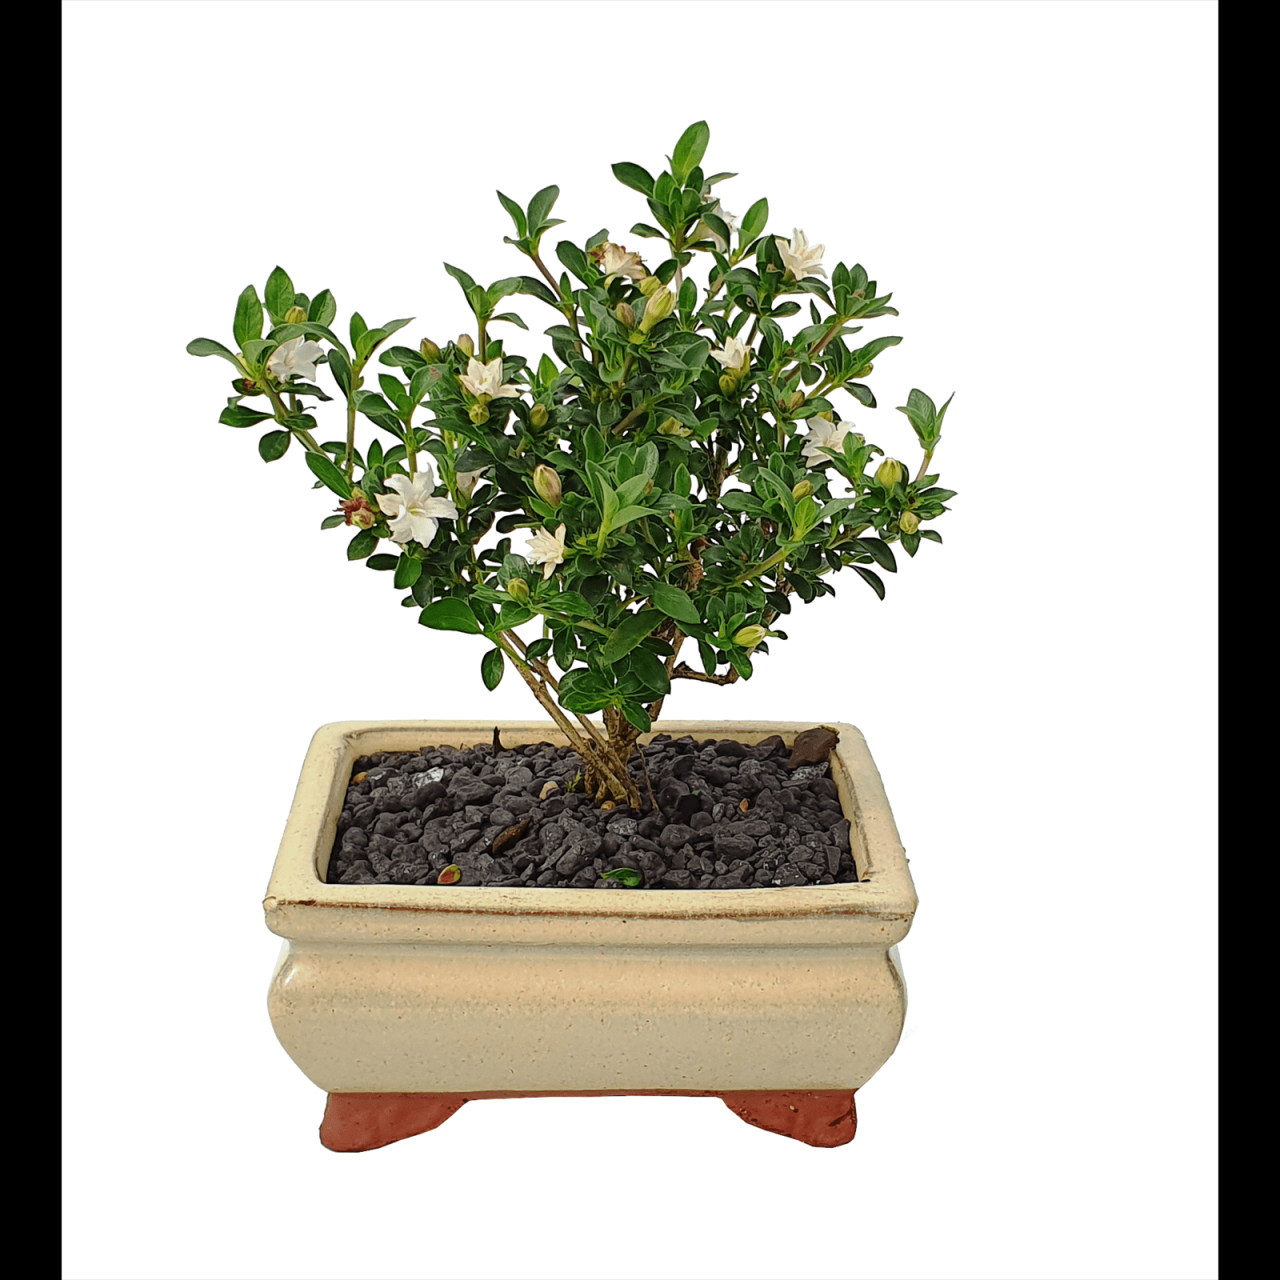 Hanging Plants Indoor | Bonsai Pots Bunnings: A Comprehensive Guide to Selecting, Using, and Creating Artistic Vessels